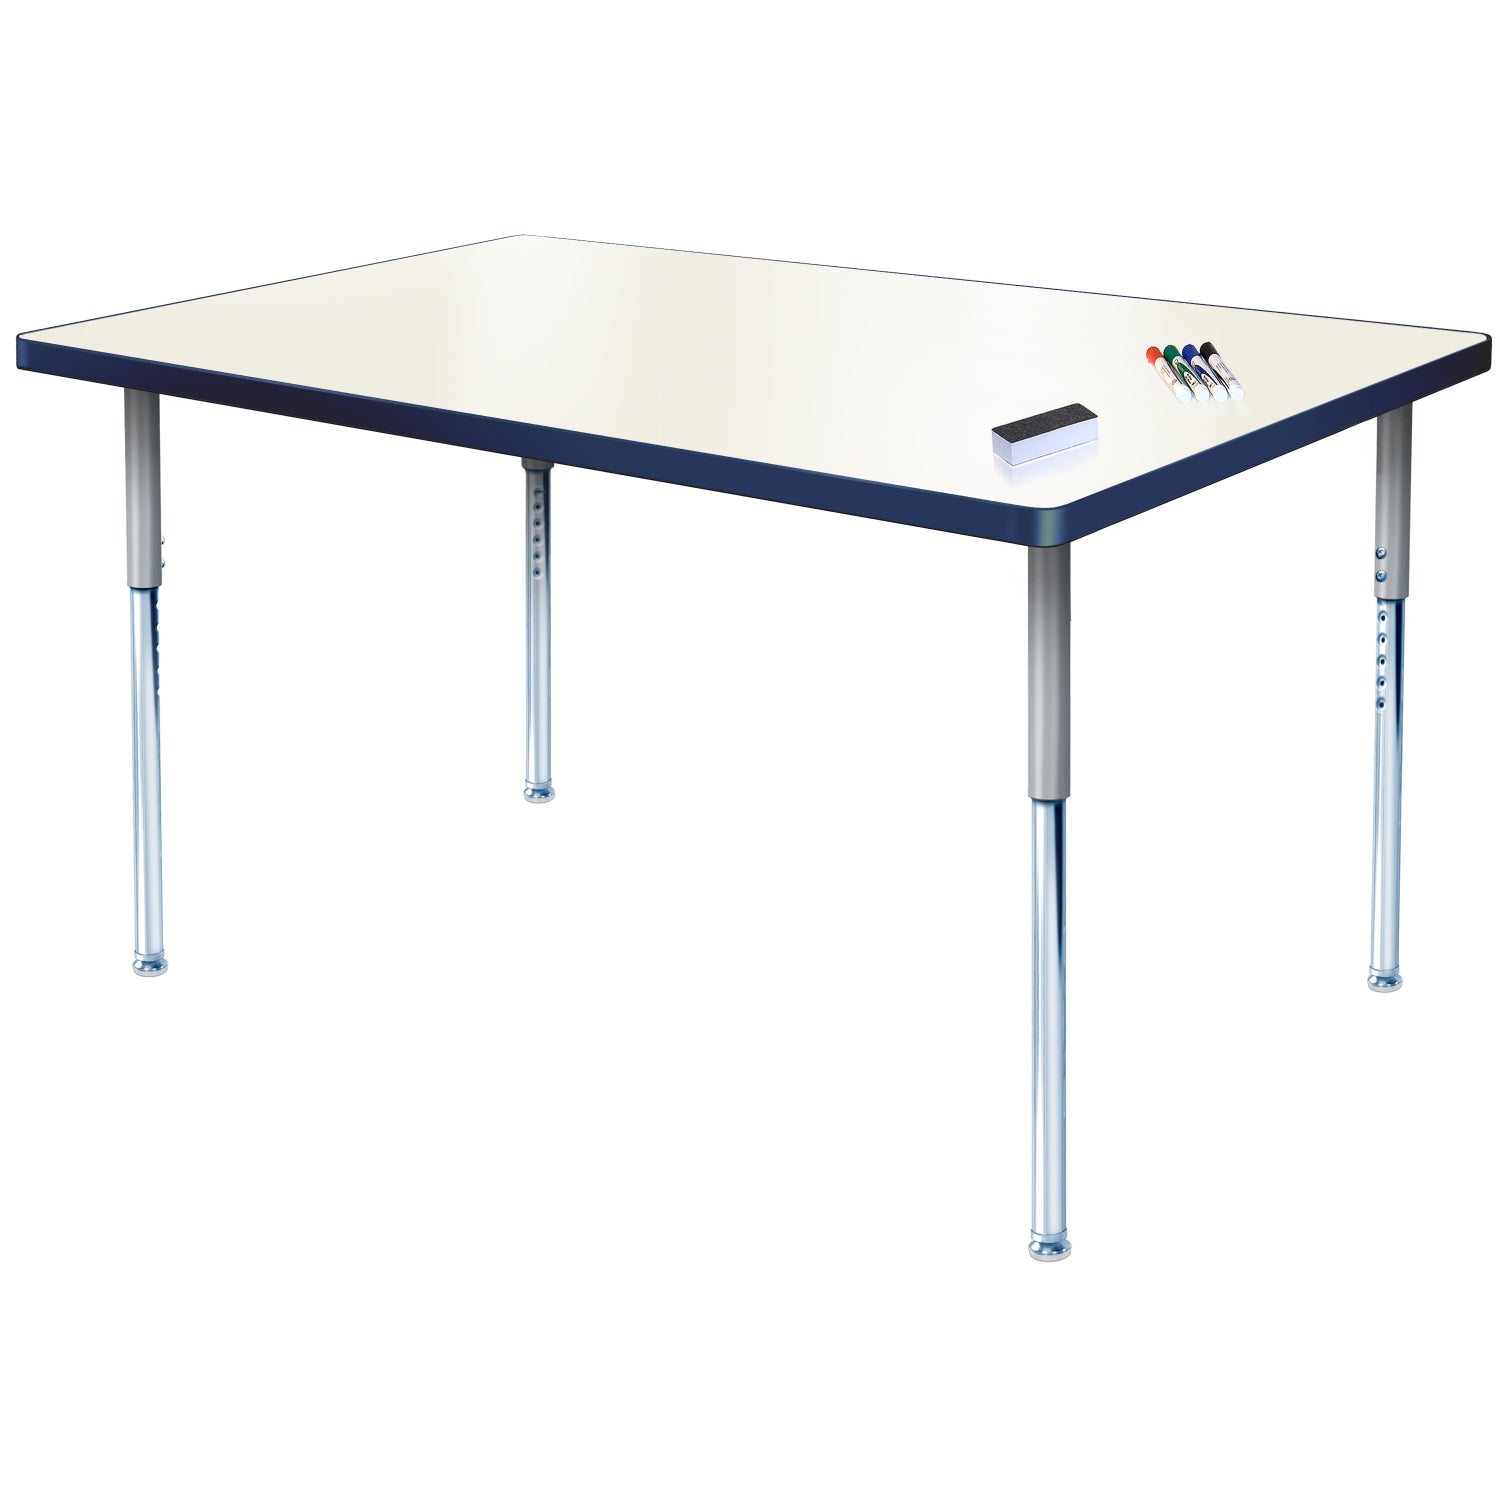 Imagination Station 24 x 36" Rectangular Activity Table with Dry Erase Markerboard Top, Modern Classic Adjustable Height Legs